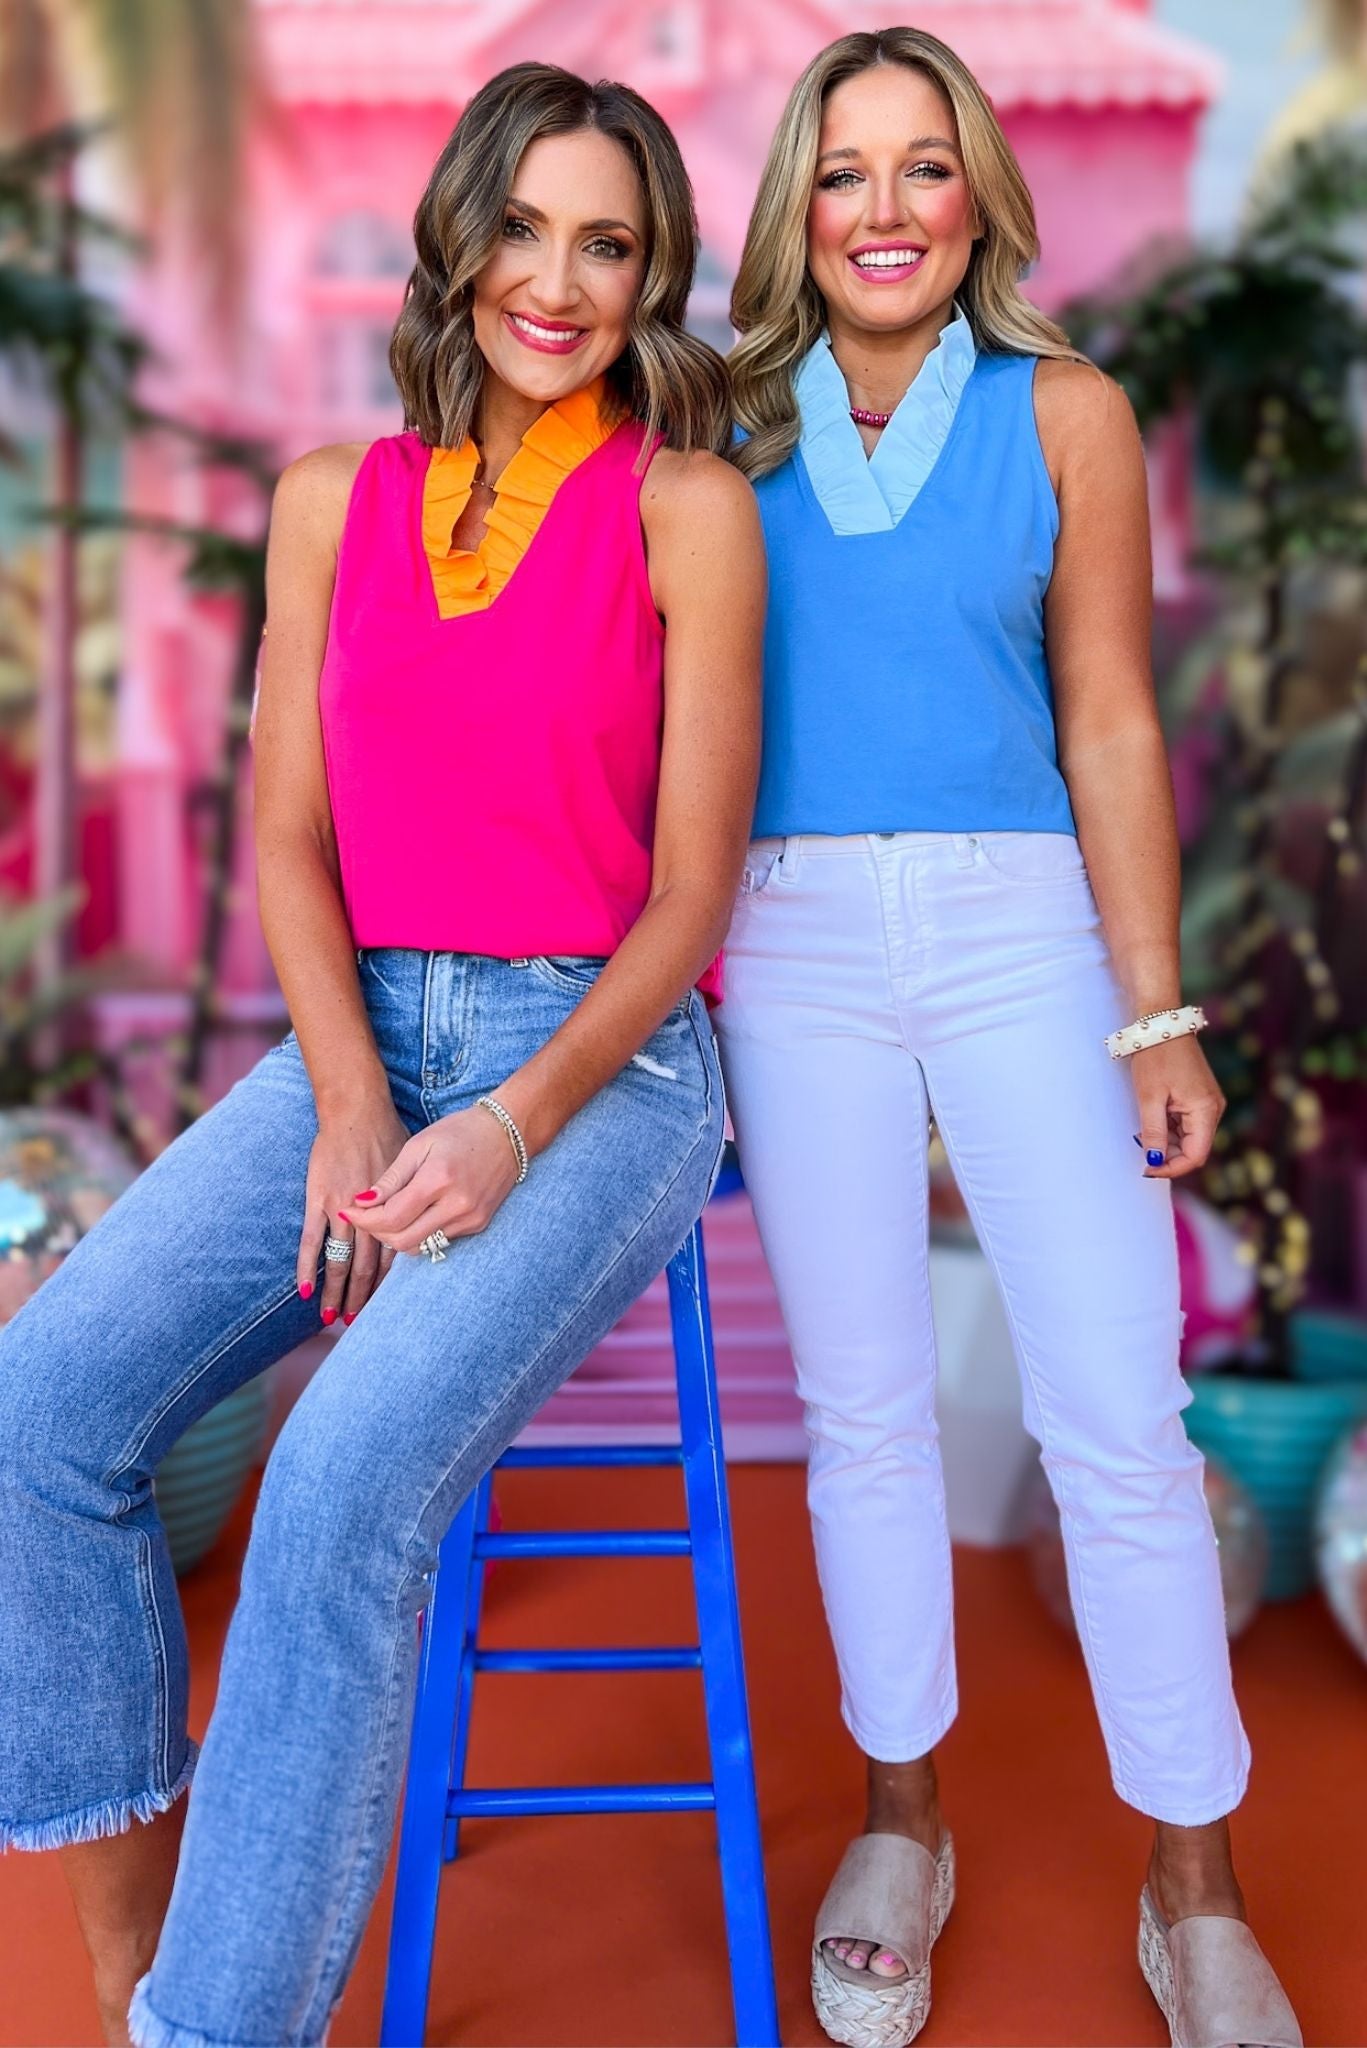 SSYS The Darcy Ruffle Colorblock Collar Sleeveless Top In Blue, ssys the label, spring break top, spring break style, spring fashion affordable fashion, elevated style, bright style, ruffle top, mom style, shop style your senses by mallory fitzsimmons, ssys by mallory fitzsimmons